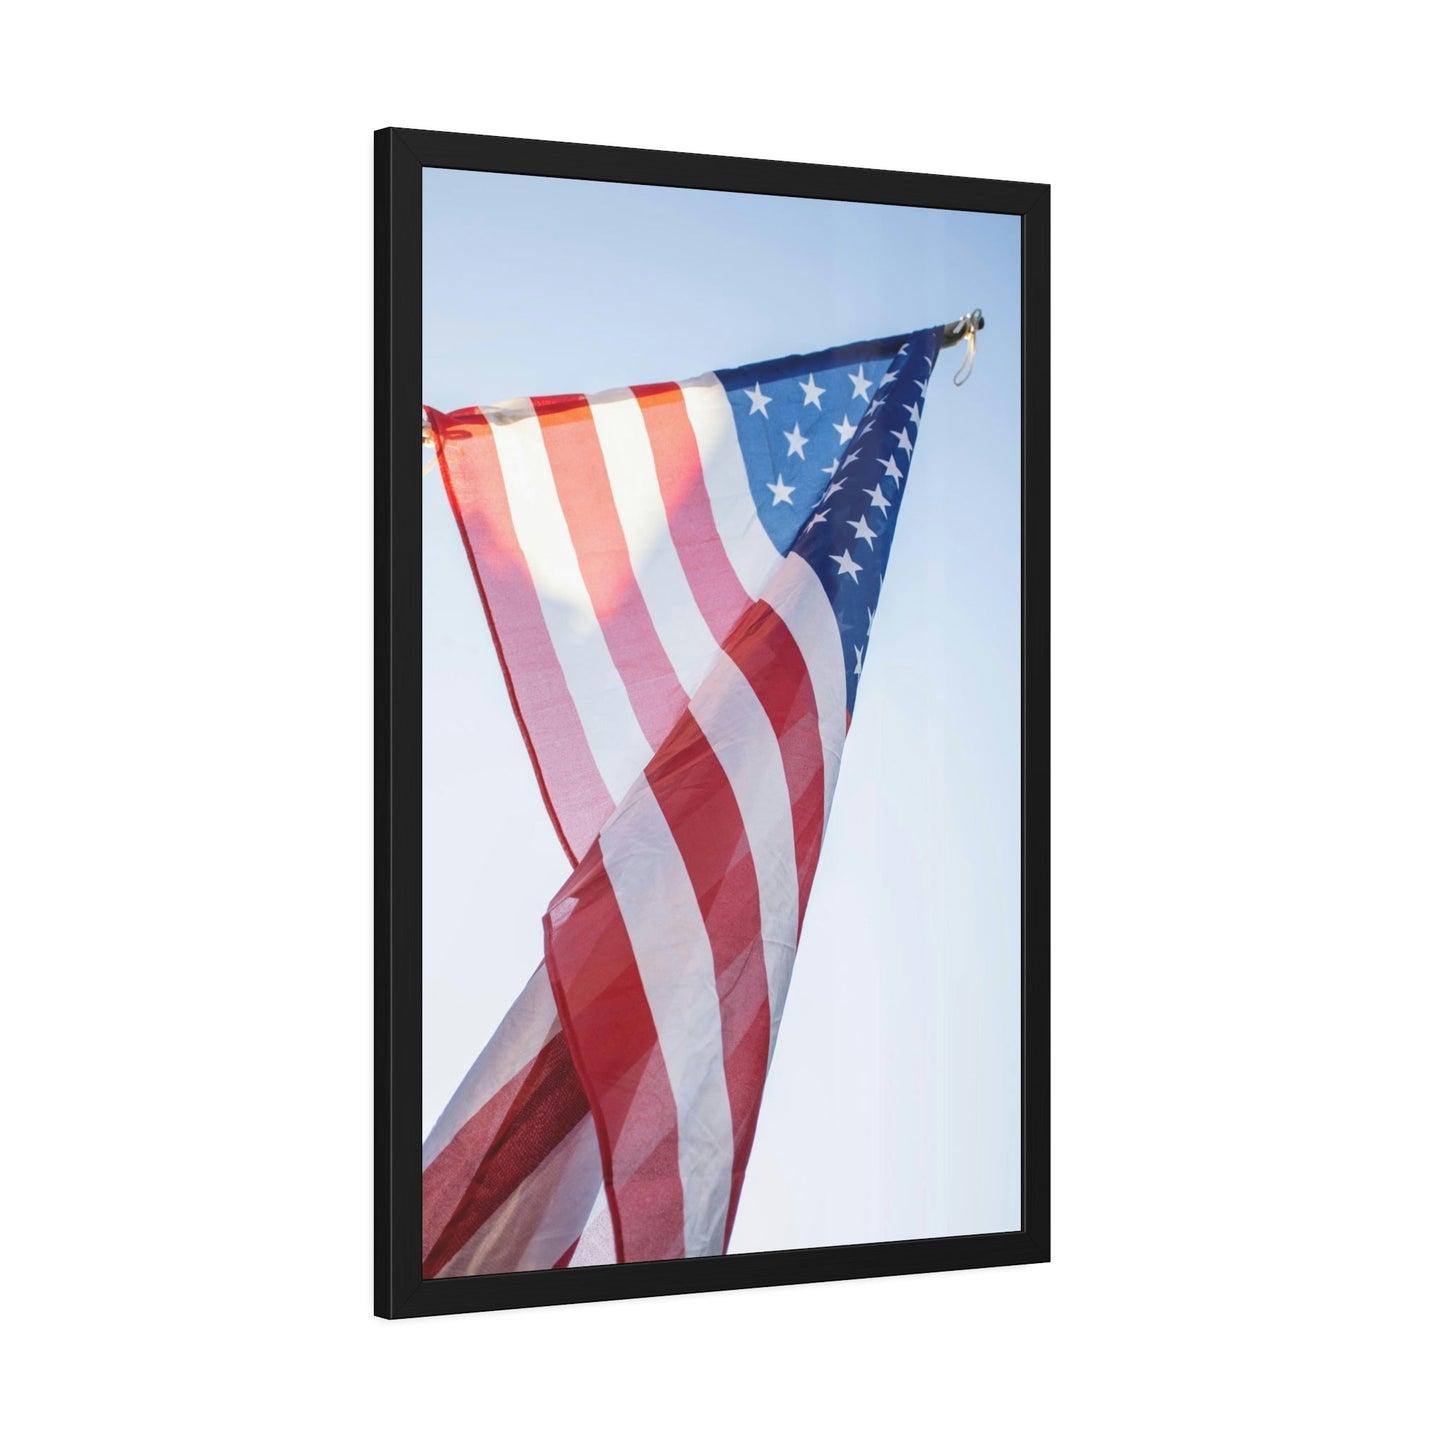 United States of America: Framed Canvas & Poster Art with the Flag